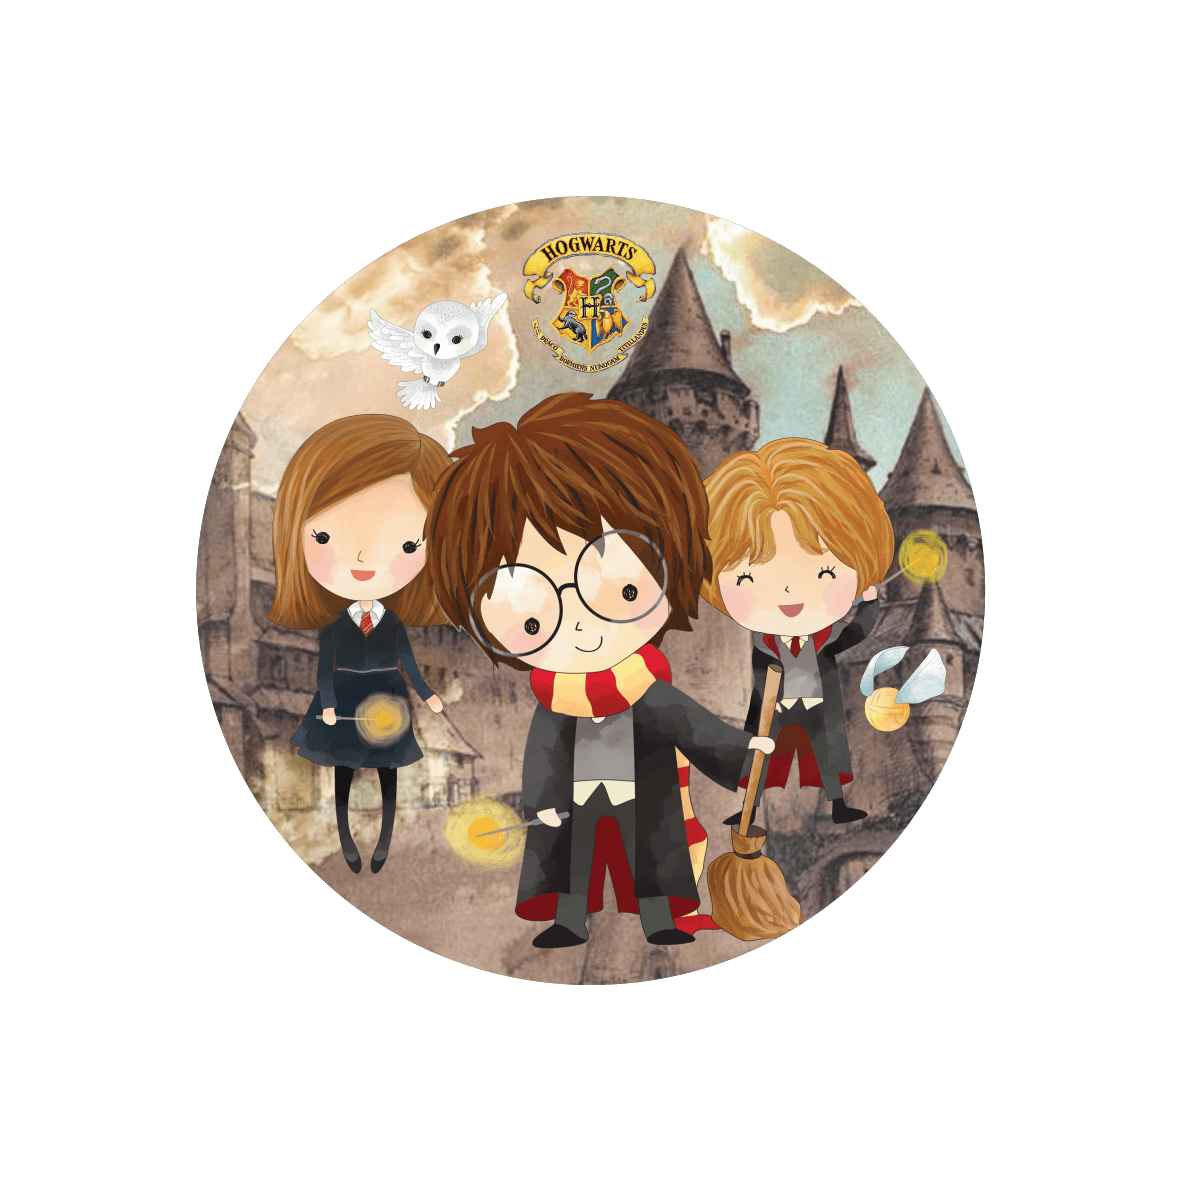  King's Cross Station Painel-sublimado-harry-potter-cute-15167